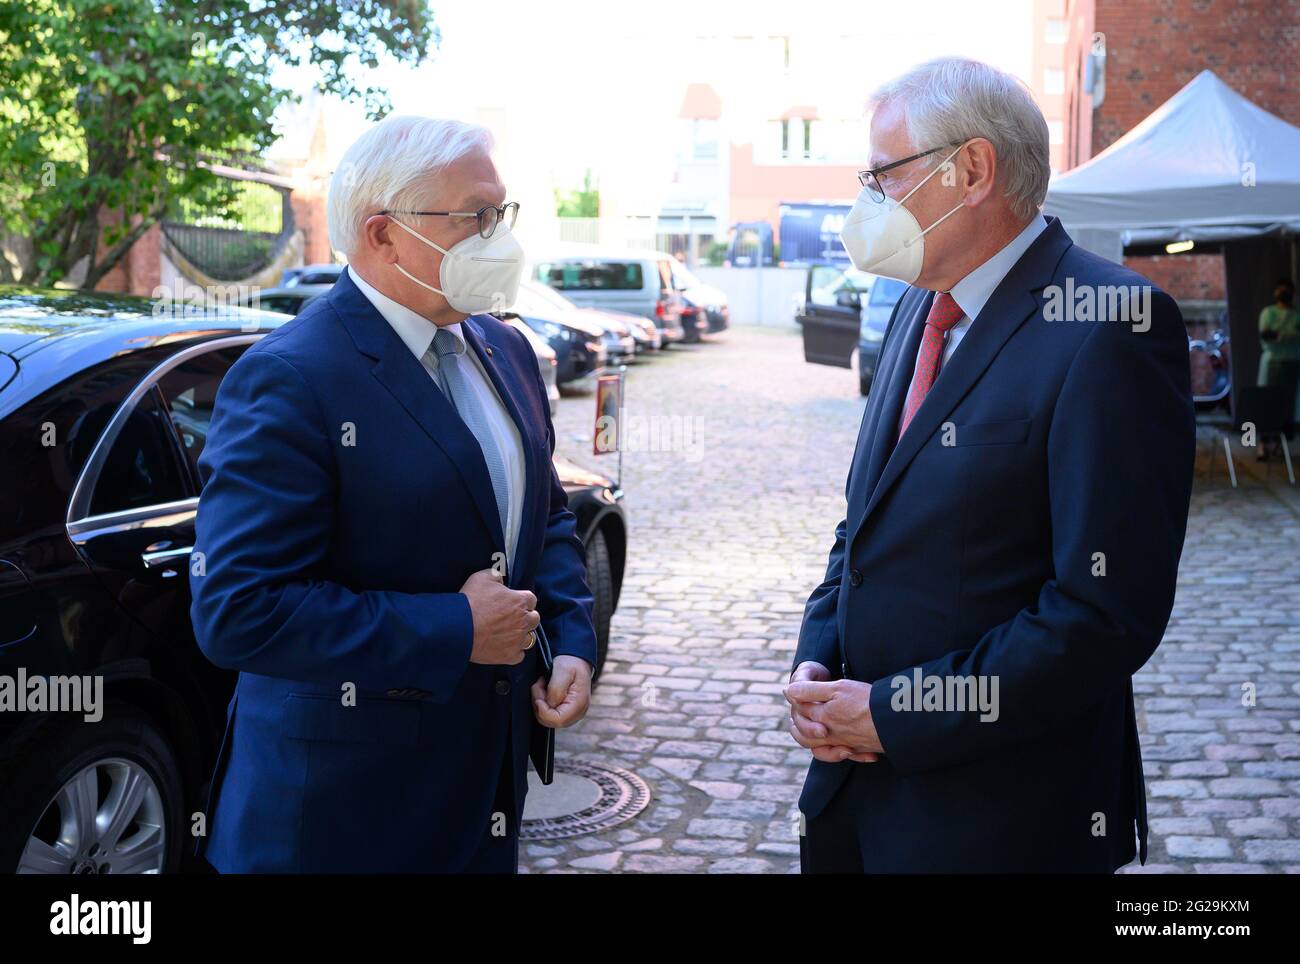 09 June 2021, Berlin: Federal President Frank-Walter Steinmeier (l) is greeted by Helmut Heinen, Chairman of the Board of Trustees and publisher of the Kölnische Rundschau, at the presentation of the Theodor Wolff Award. The prize of the German Association of Digital Publishers and Newspaper Publishers (BDZV) is the most prestigious award in the German newspaper industry. It commemorates the long-time editor-in-chief of the legendary 'Berliner Tageblatt', Theodor Wolff (1868-1943). This year, 484 journalists took part in the competition. The prize is endowed with a total of 30,000 euros. Photo Stock Photo